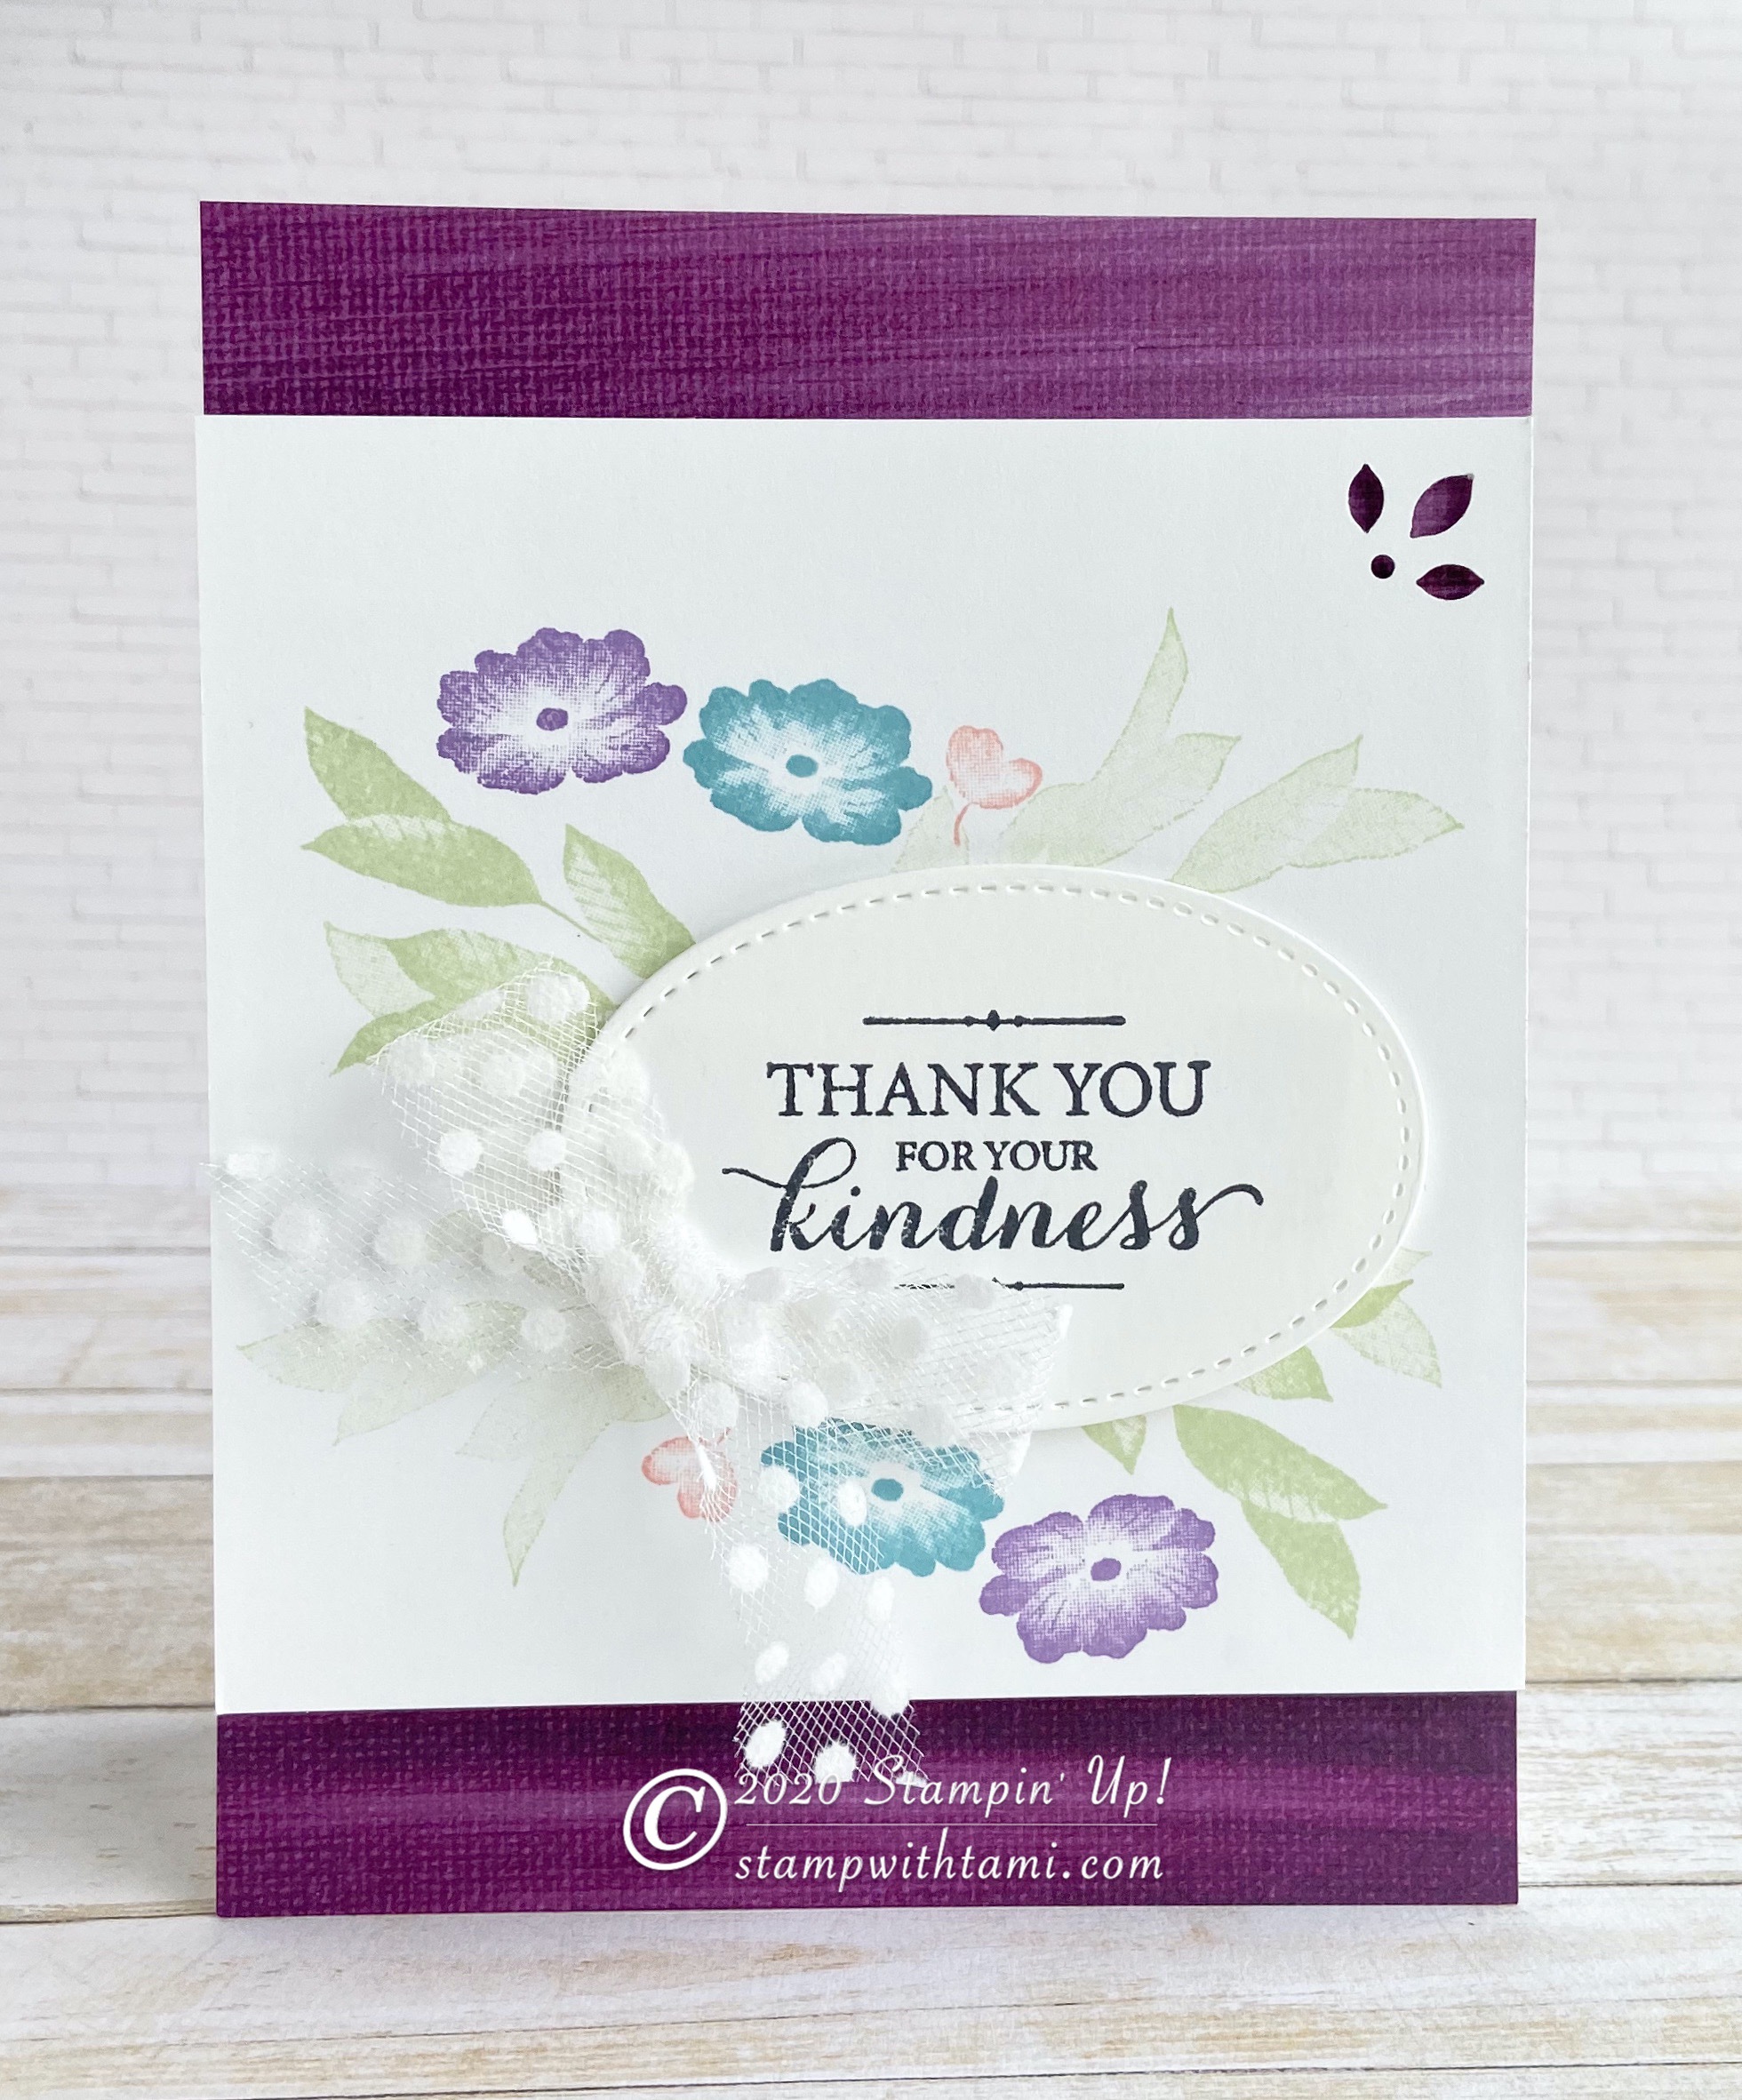 Card Thank You For Your Kindness From Layered Kindness Stamps New Stampin Up Demonstrator Tami White Stamping Crafting Card Making